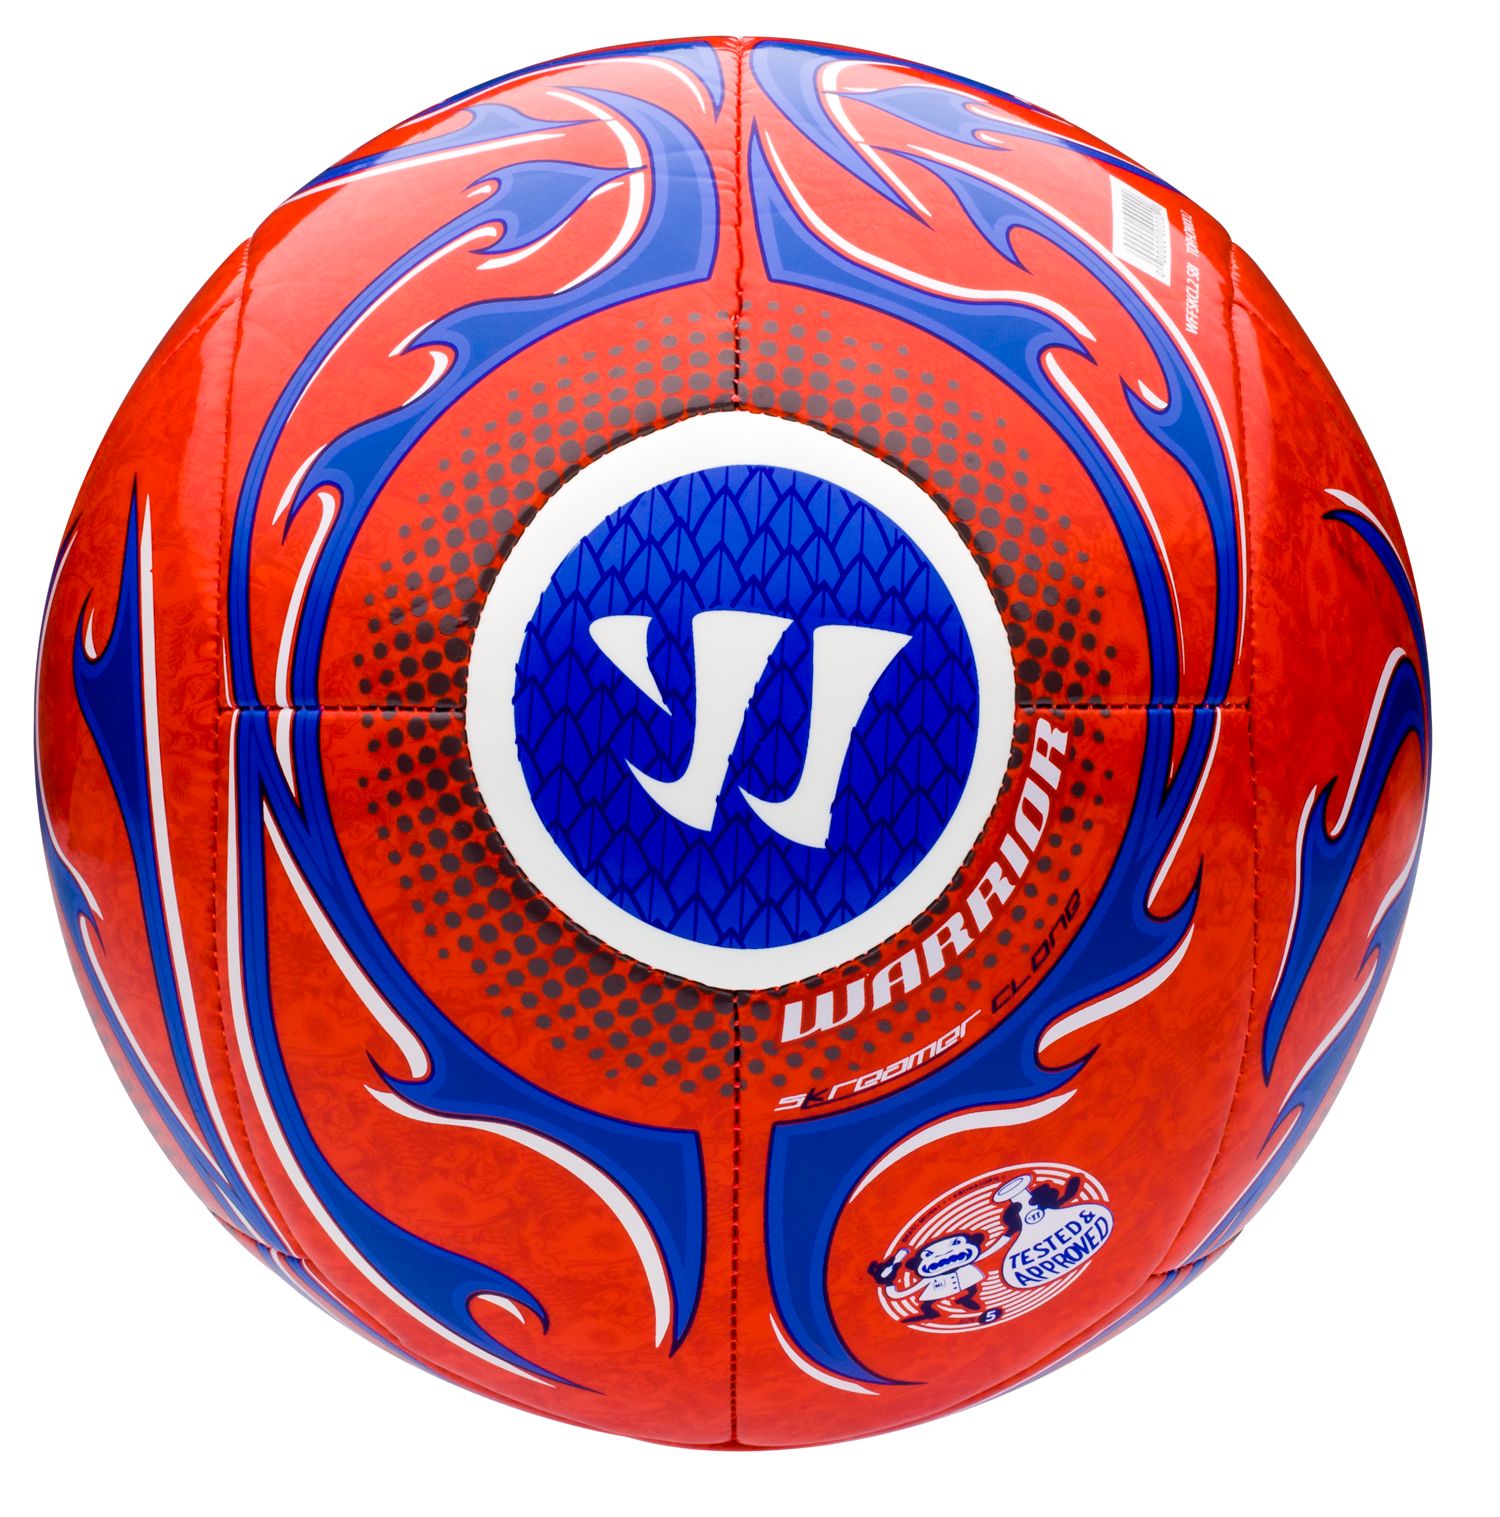 Skreamer Clone Ball, Spicy Orange with Baja Blue & Iron image number 0